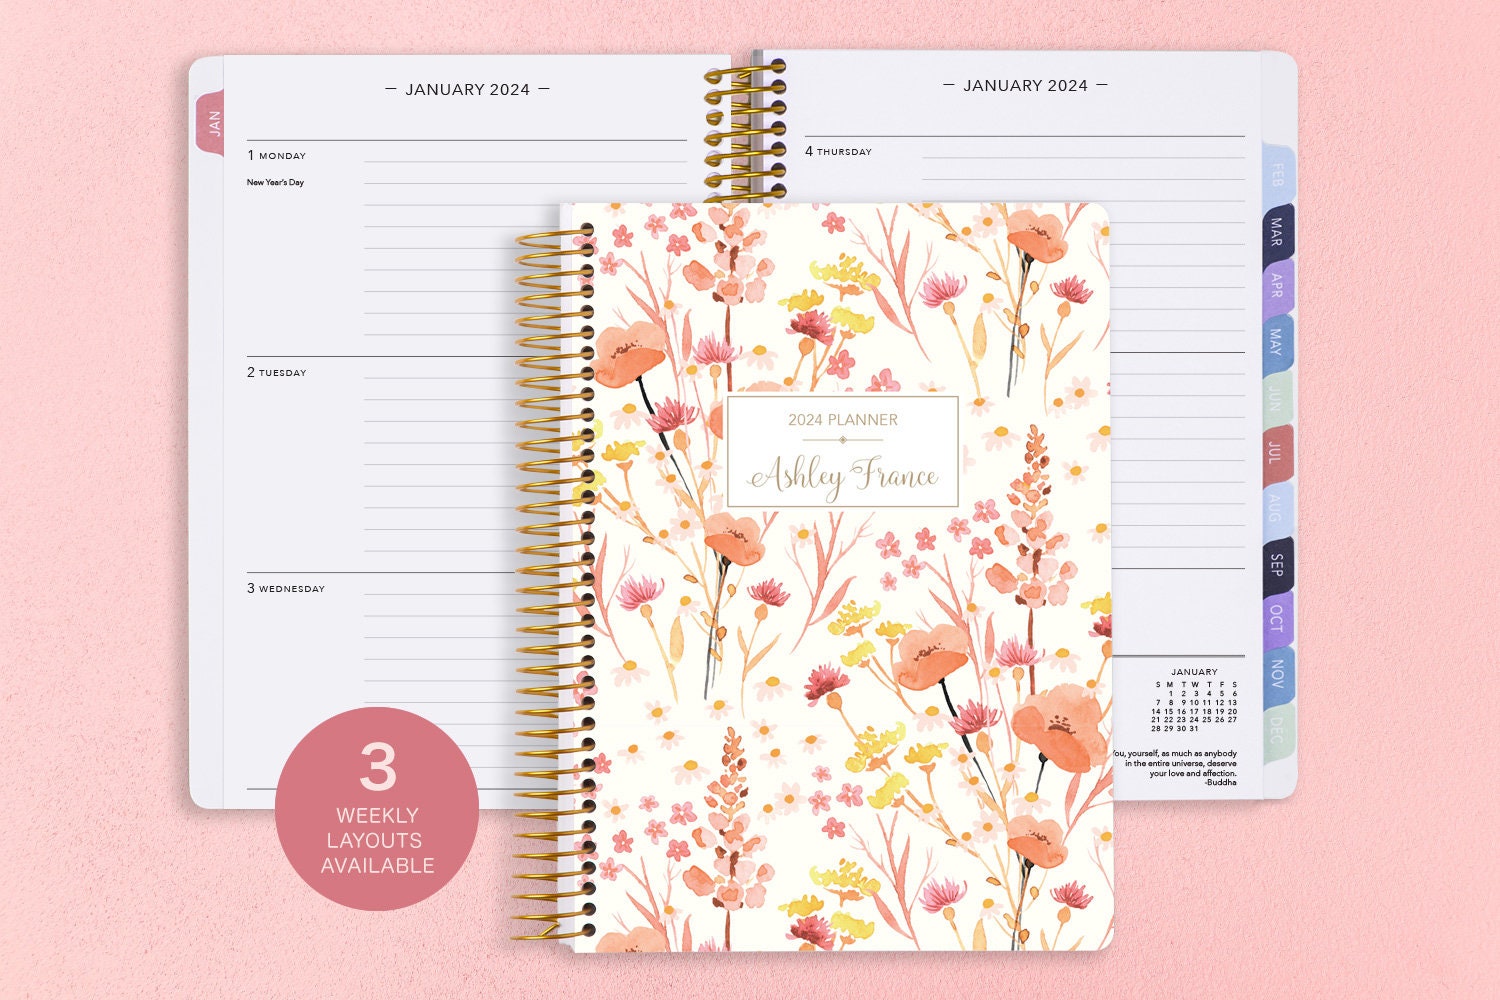 Weekly Planner Agenda 52 Sheets Tear Off Daily Schedule Notebook Organizer  Undated To Do List Notepad Task Checklist Dairy - Planners - AliExpress